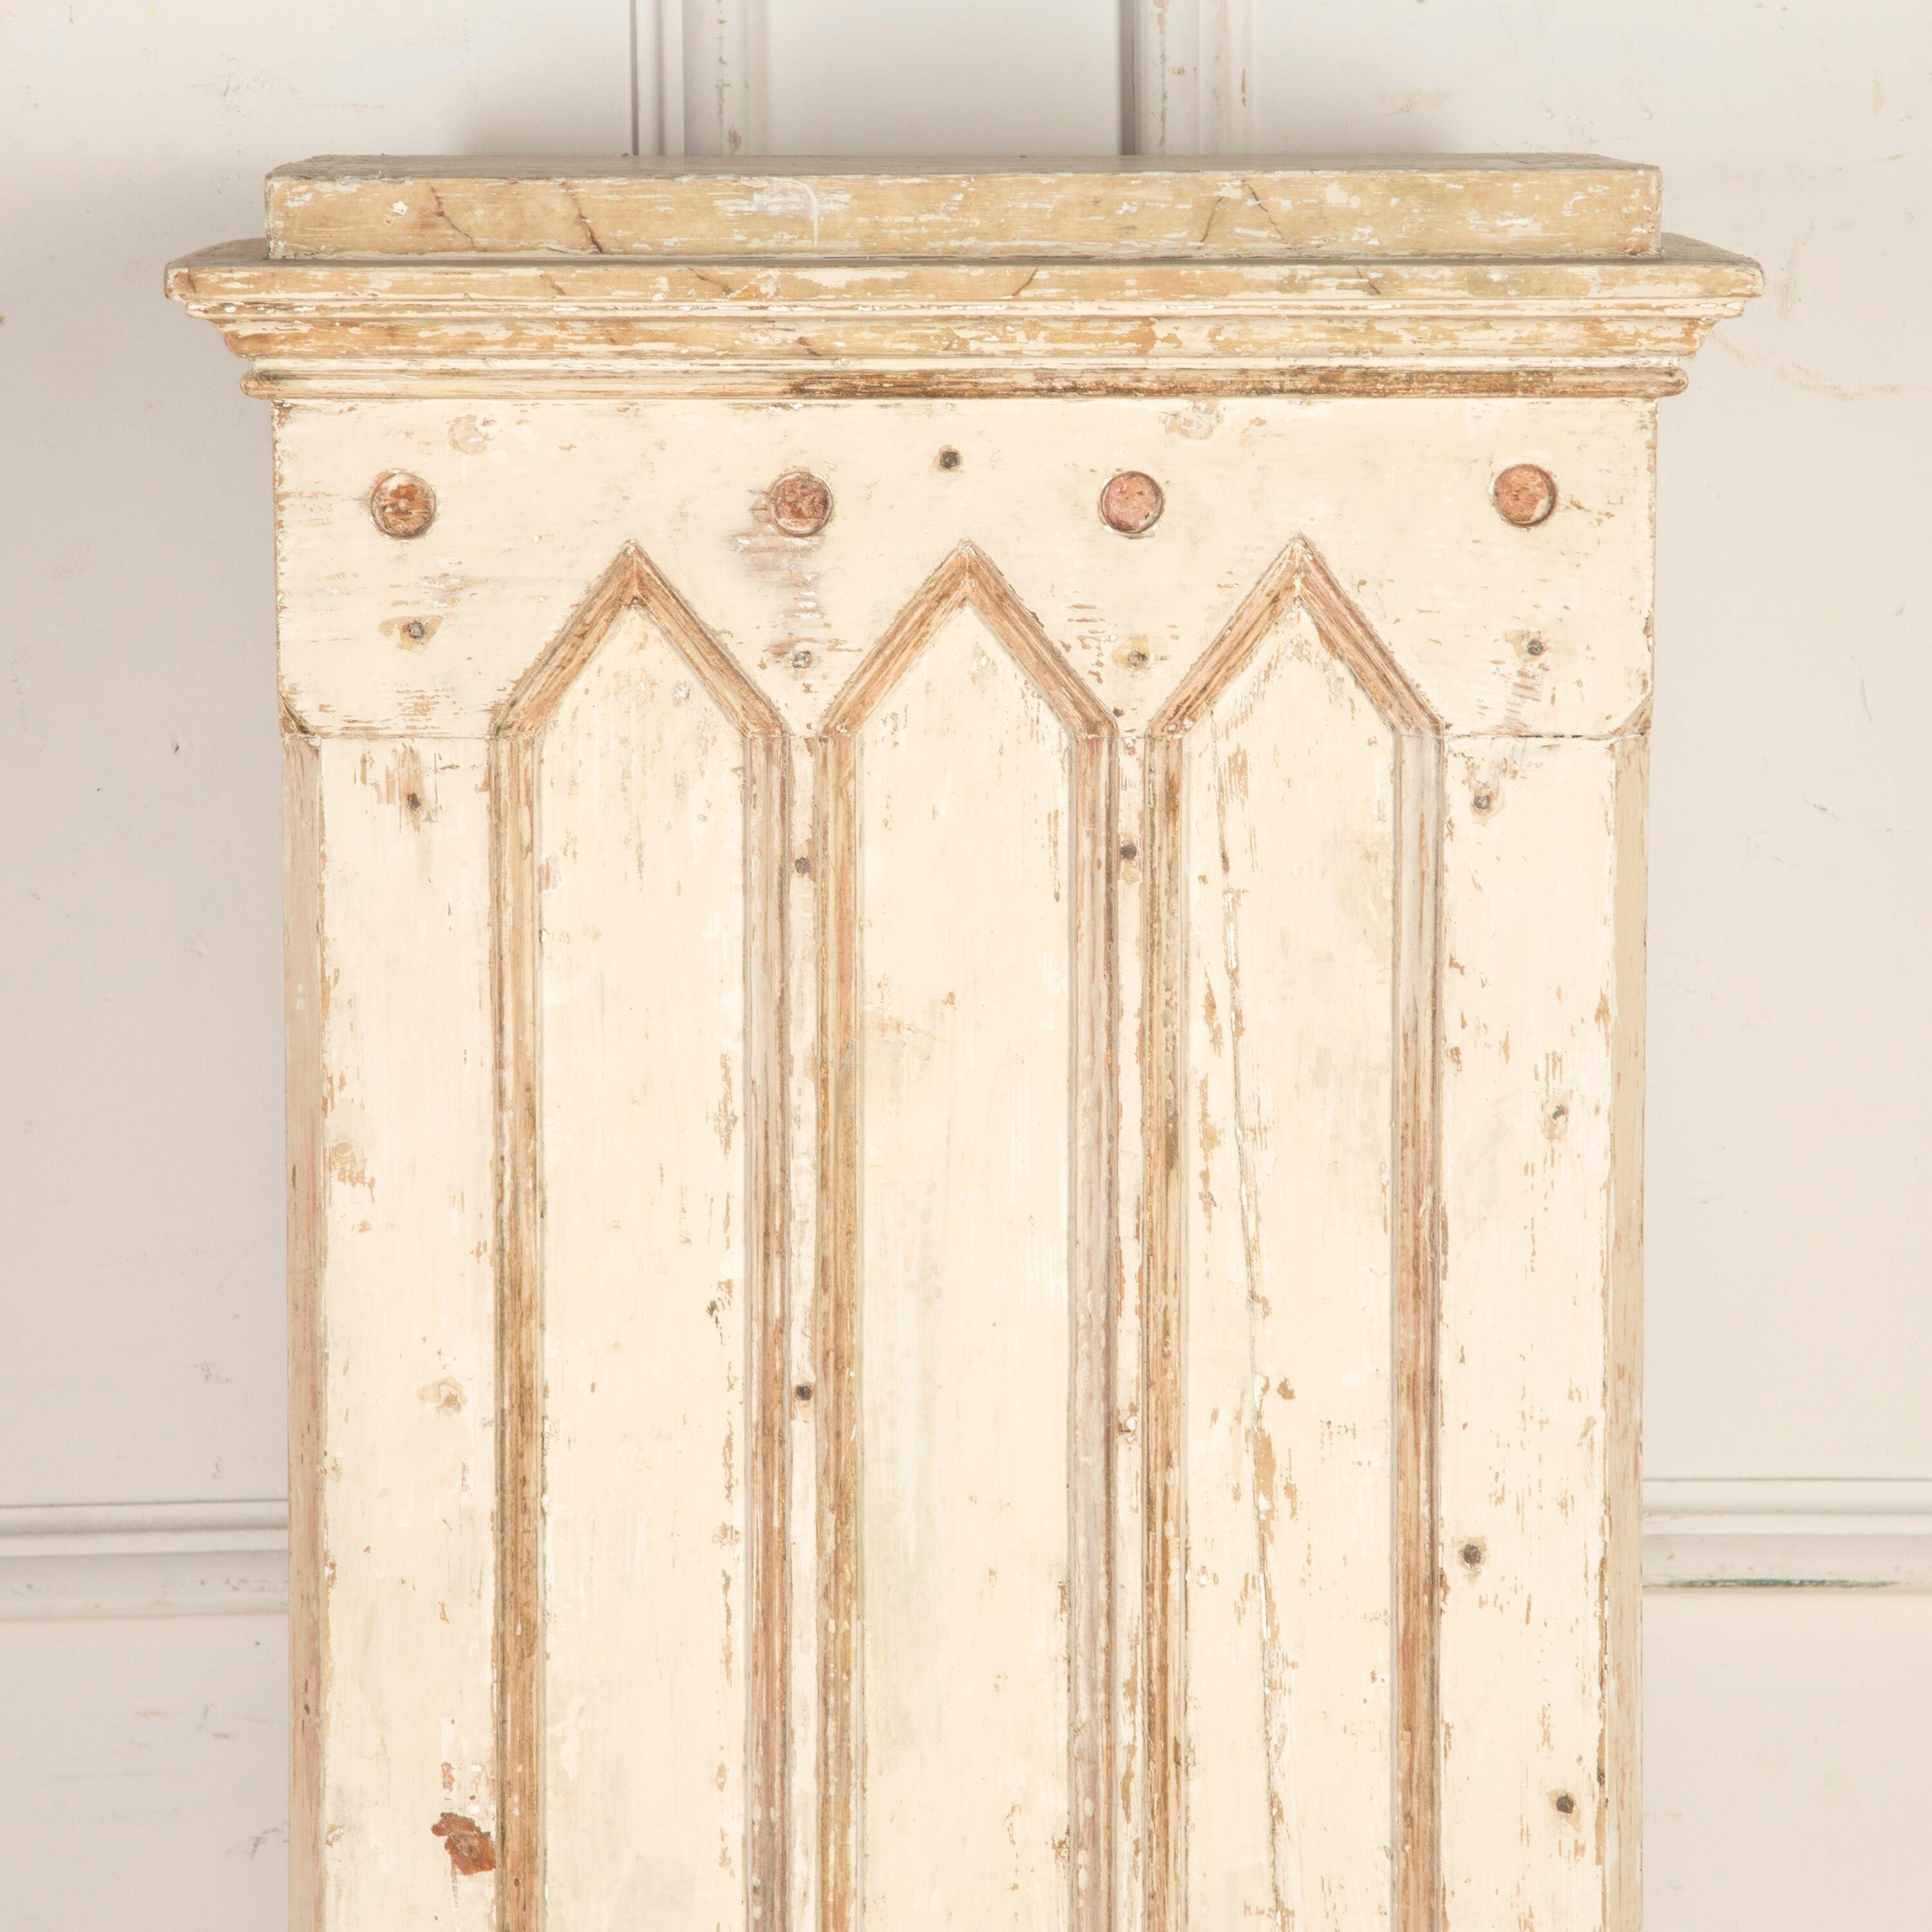 Large Swedish Empire early 20th Century column pedestal. 

This wonderful neoclassical pedestal features a moulded faux marble top over the main shaft with arched and recessed panels and roundels. Resting on a substantial stepped base. 

This